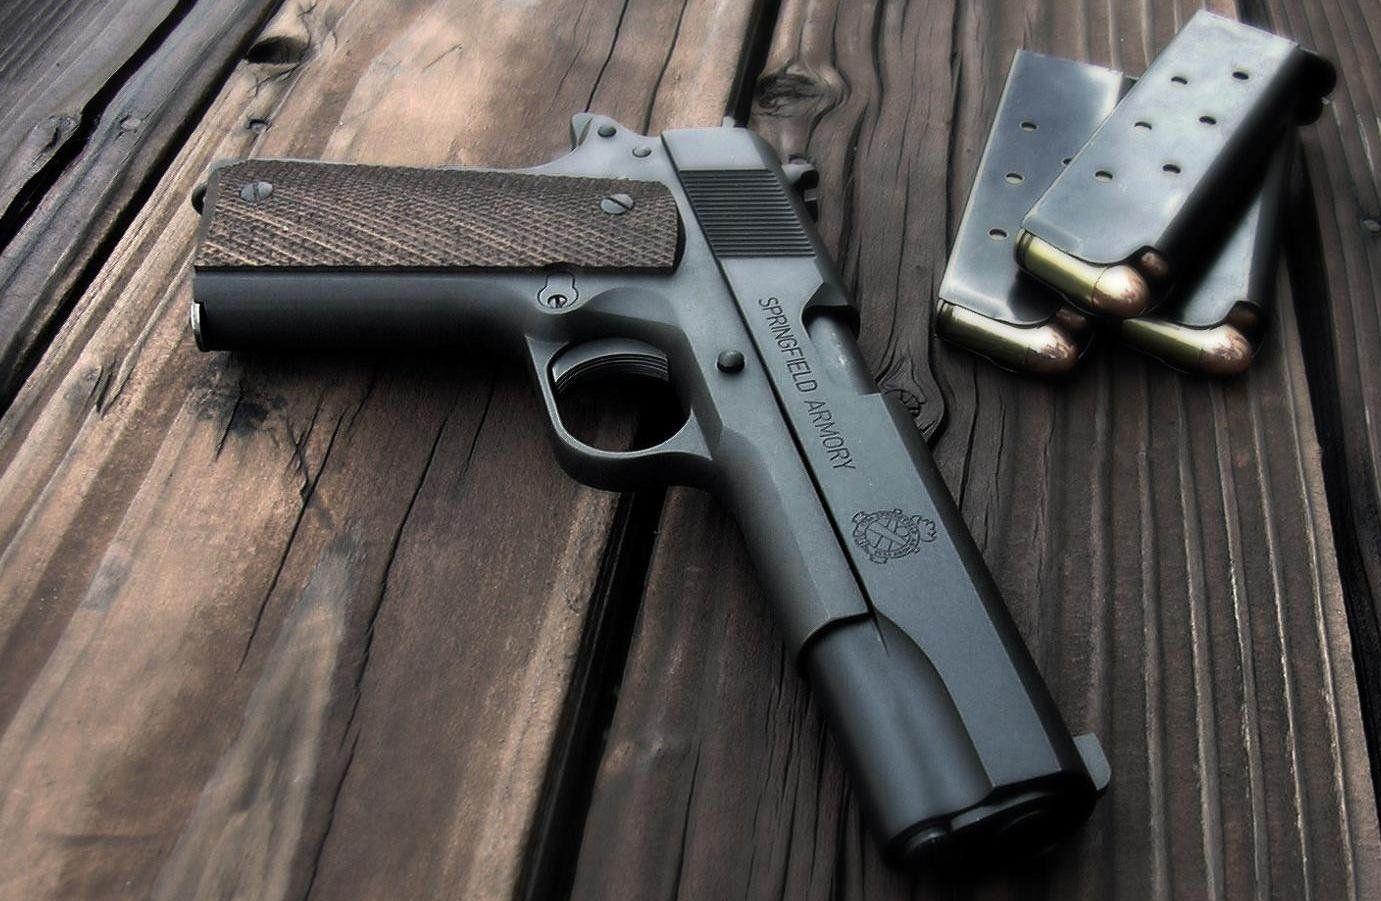 Springfield Armory 1911 Pistol Wallpaper and Background Image